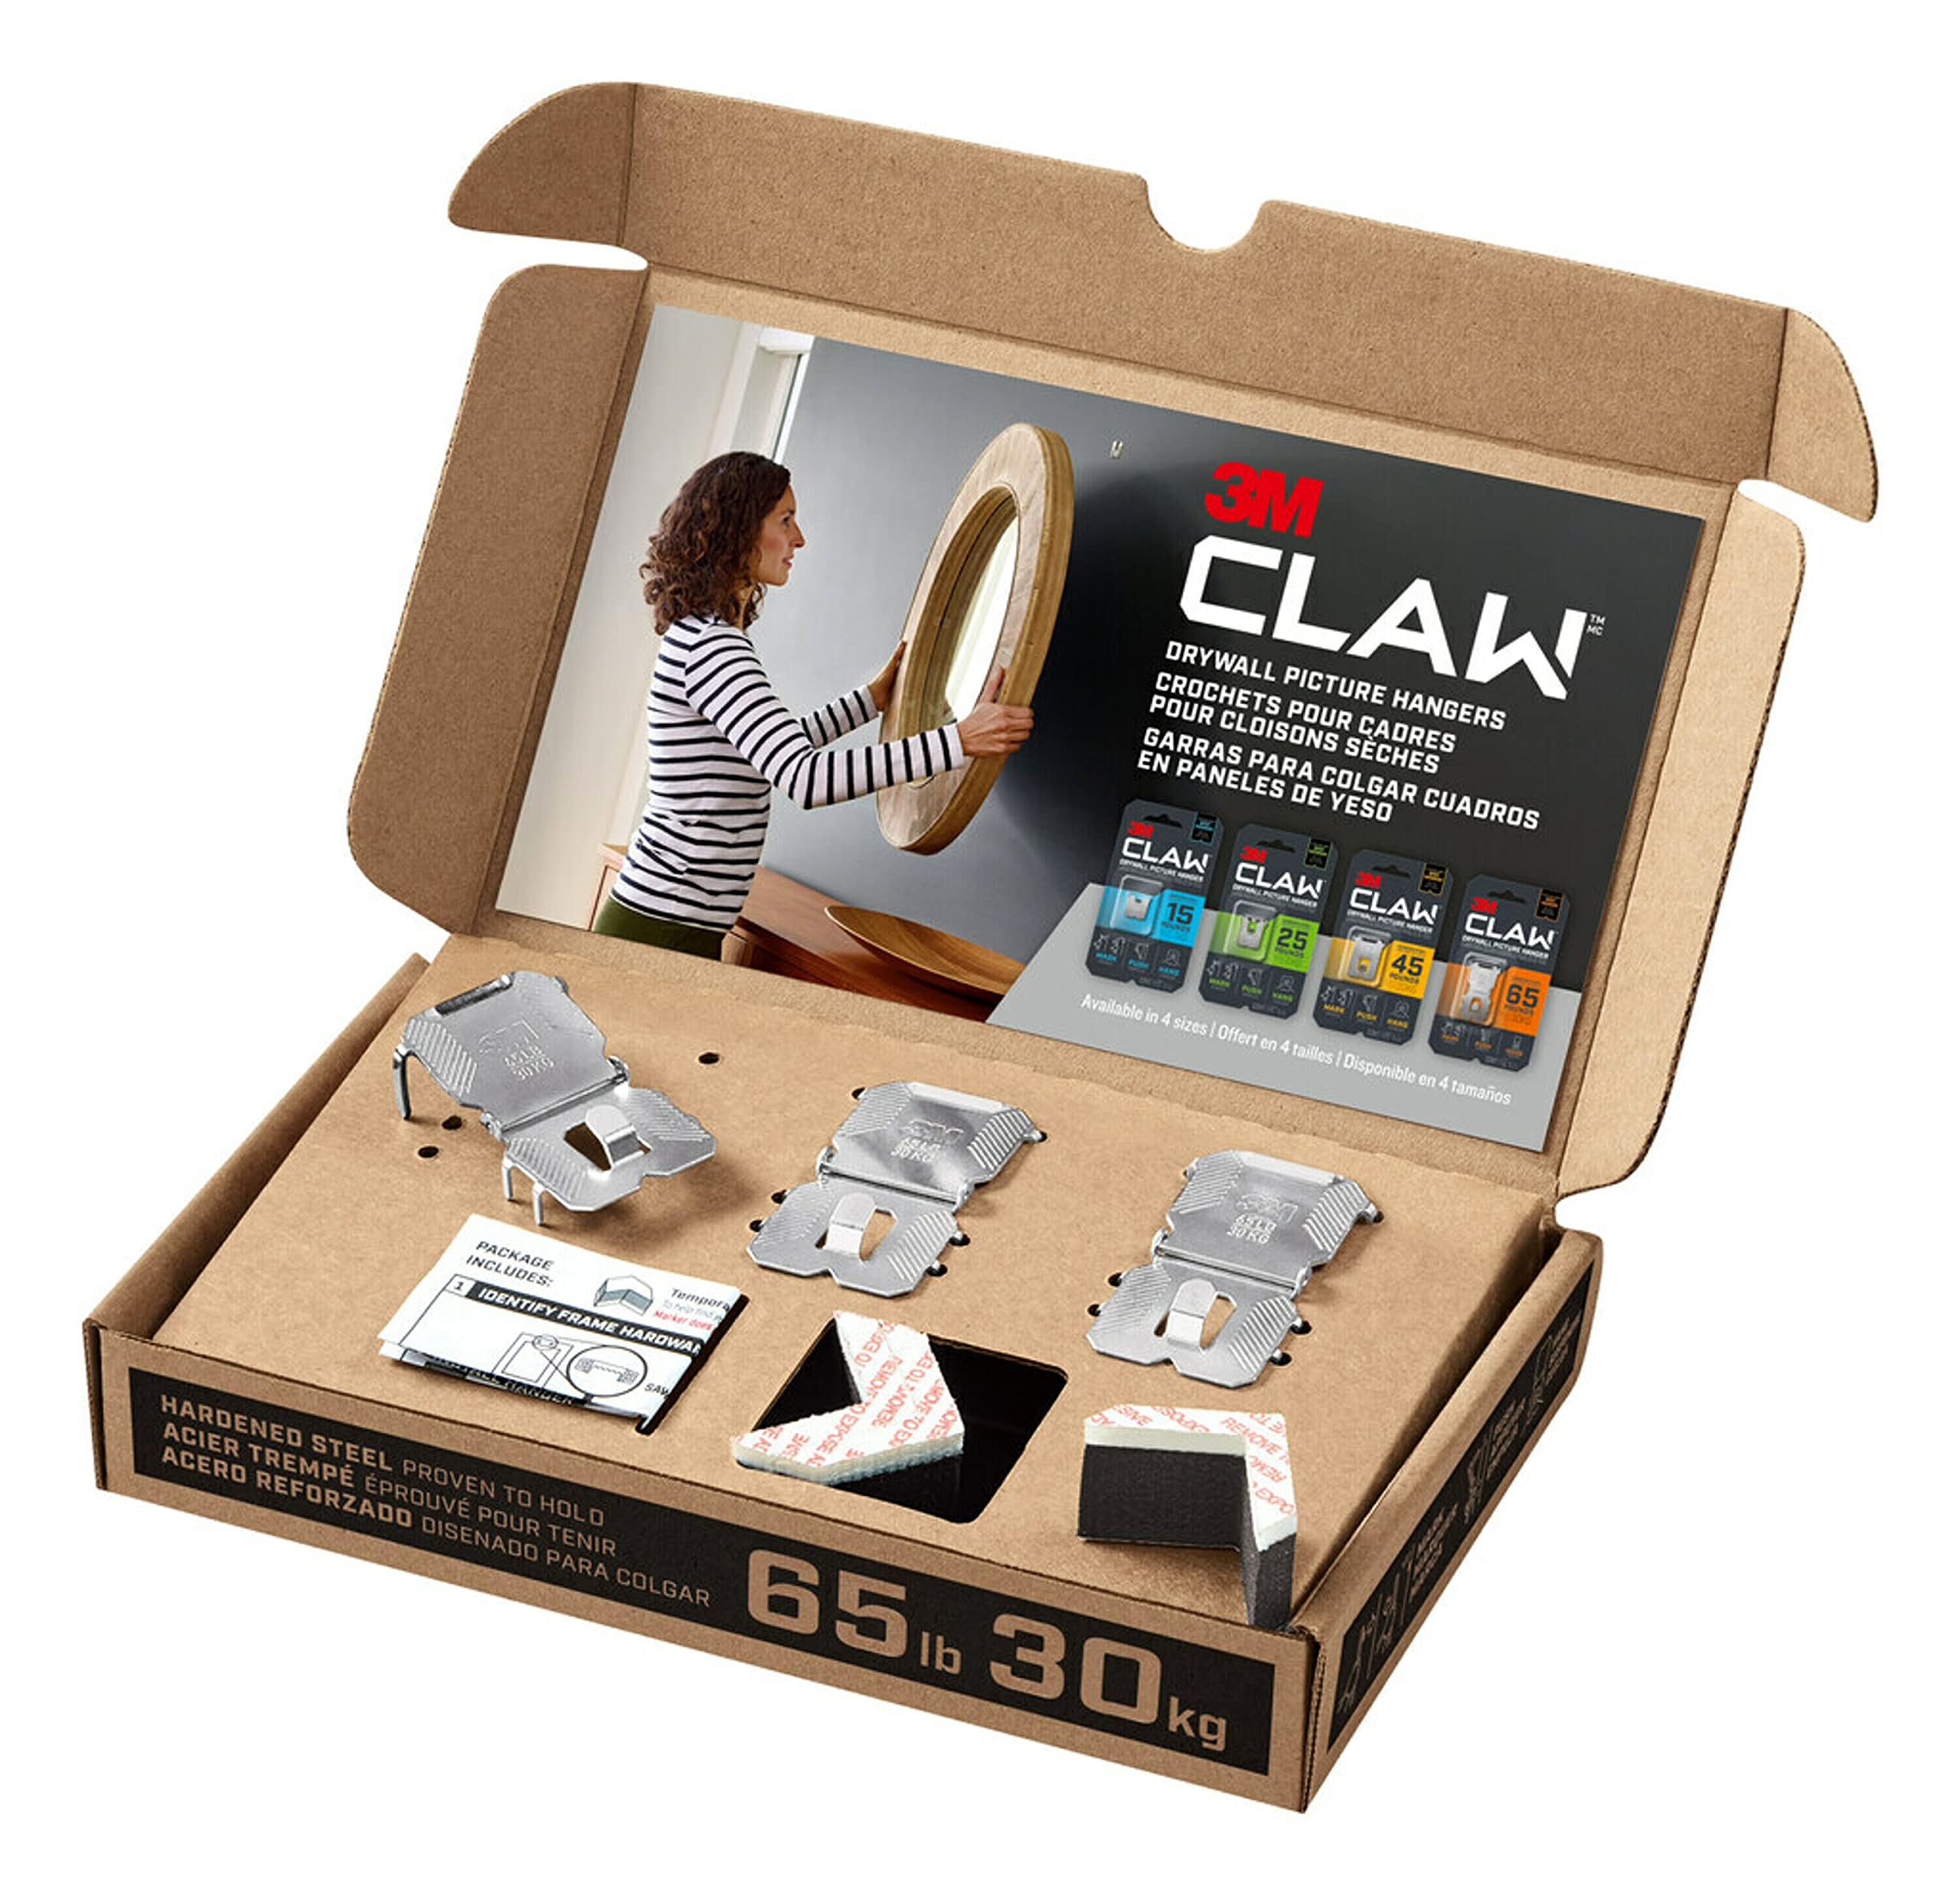 3M CLAW 3PH65M-3ESF Temporary Spot, Holds 65 lbs, 3 Markers/Pack Drywall Picture Hanger, 0